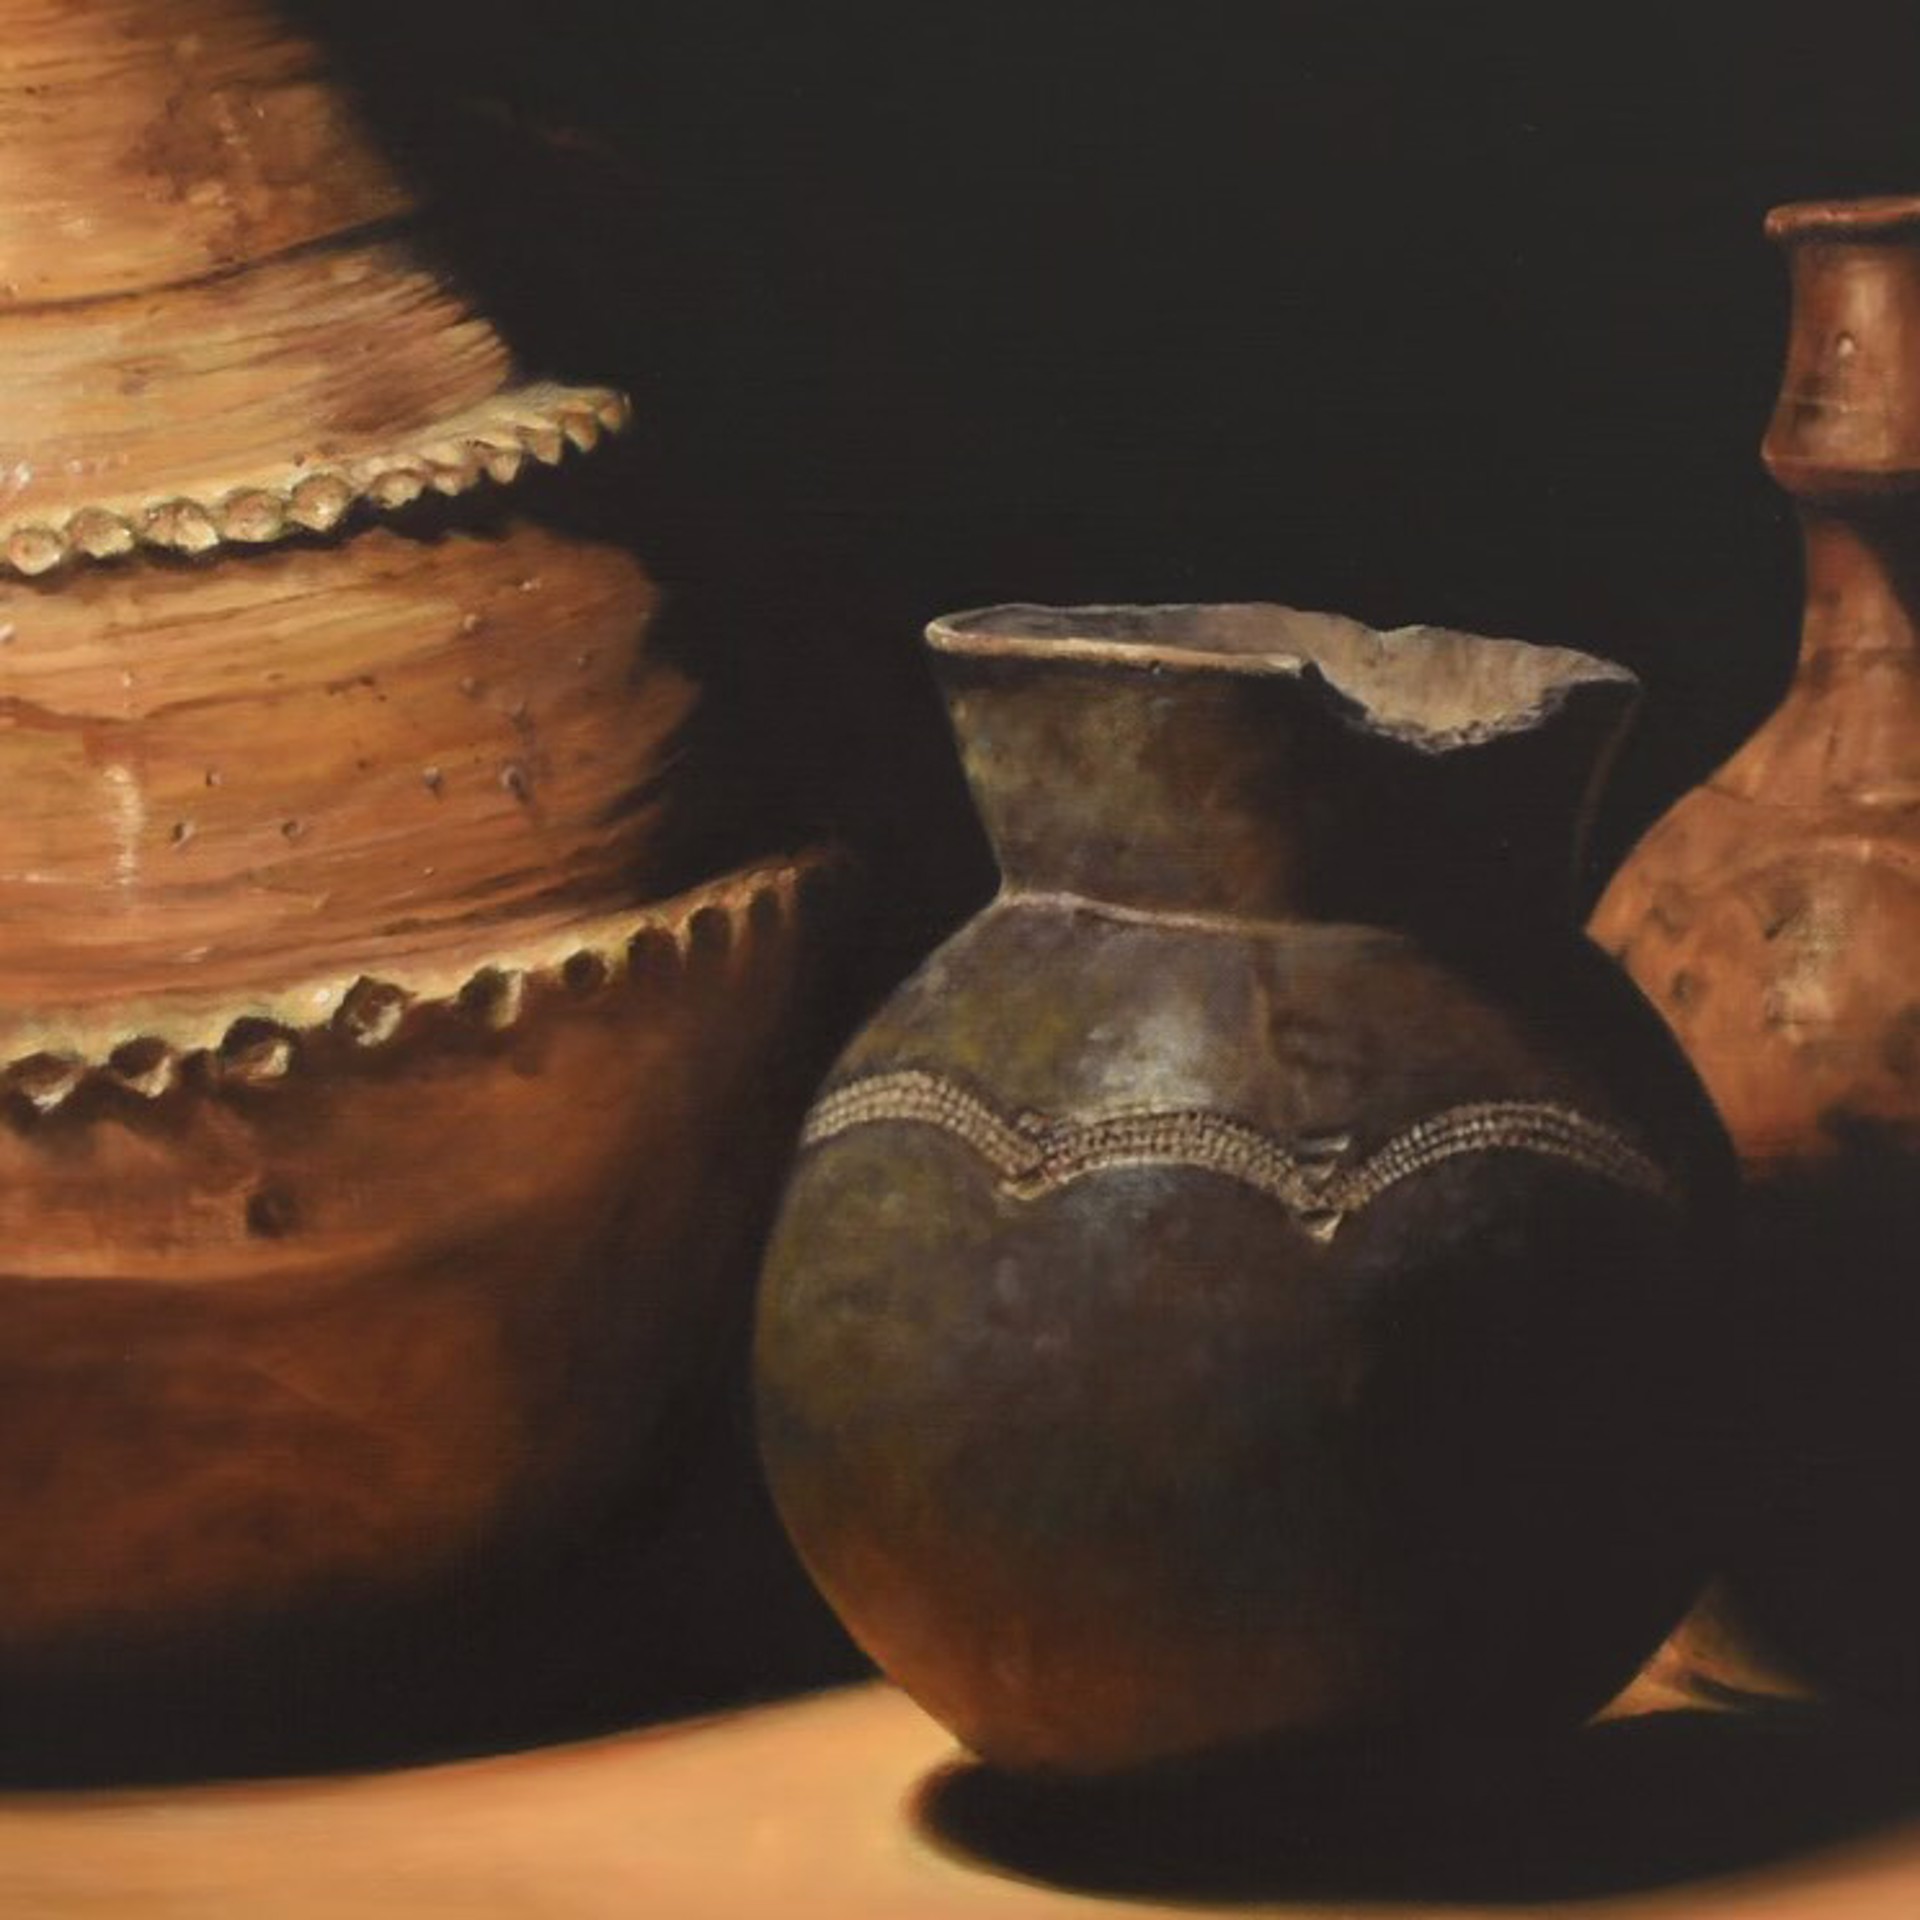 Moroccan Vessels by Mary Calengor